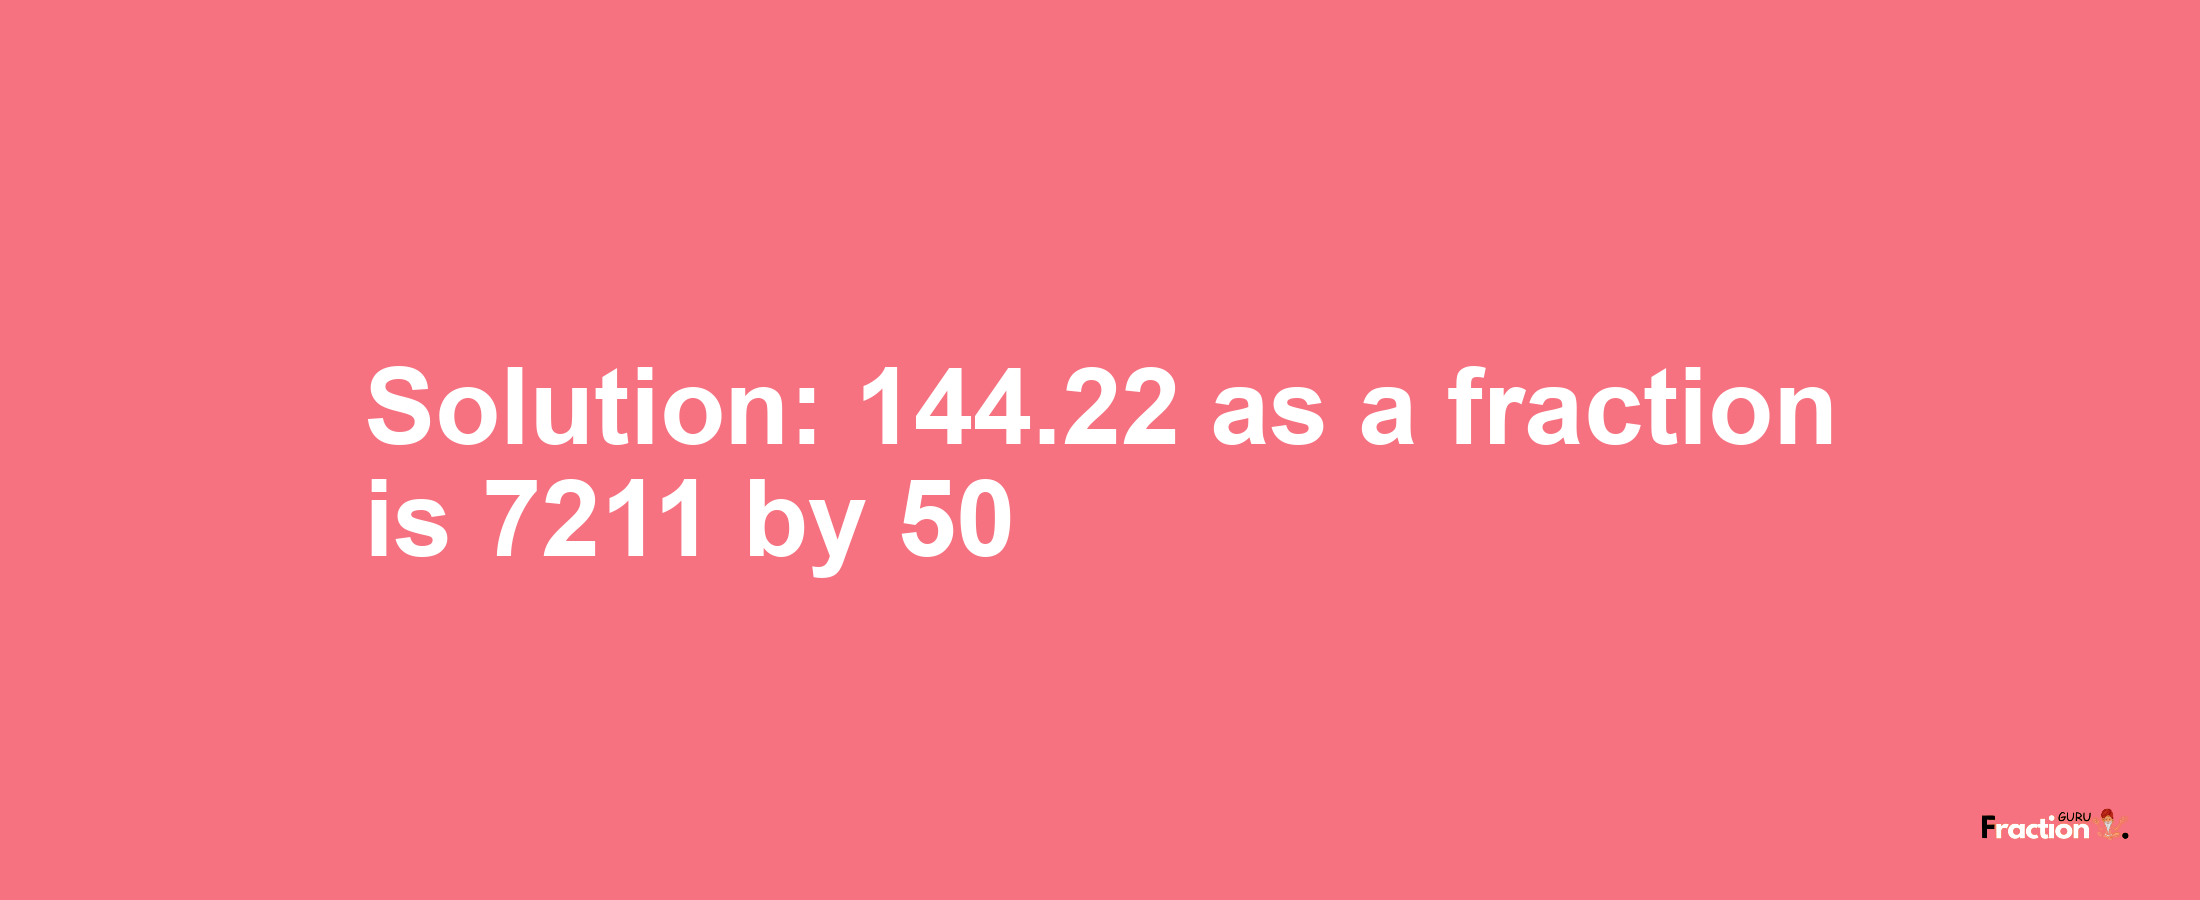 Solution:144.22 as a fraction is 7211/50